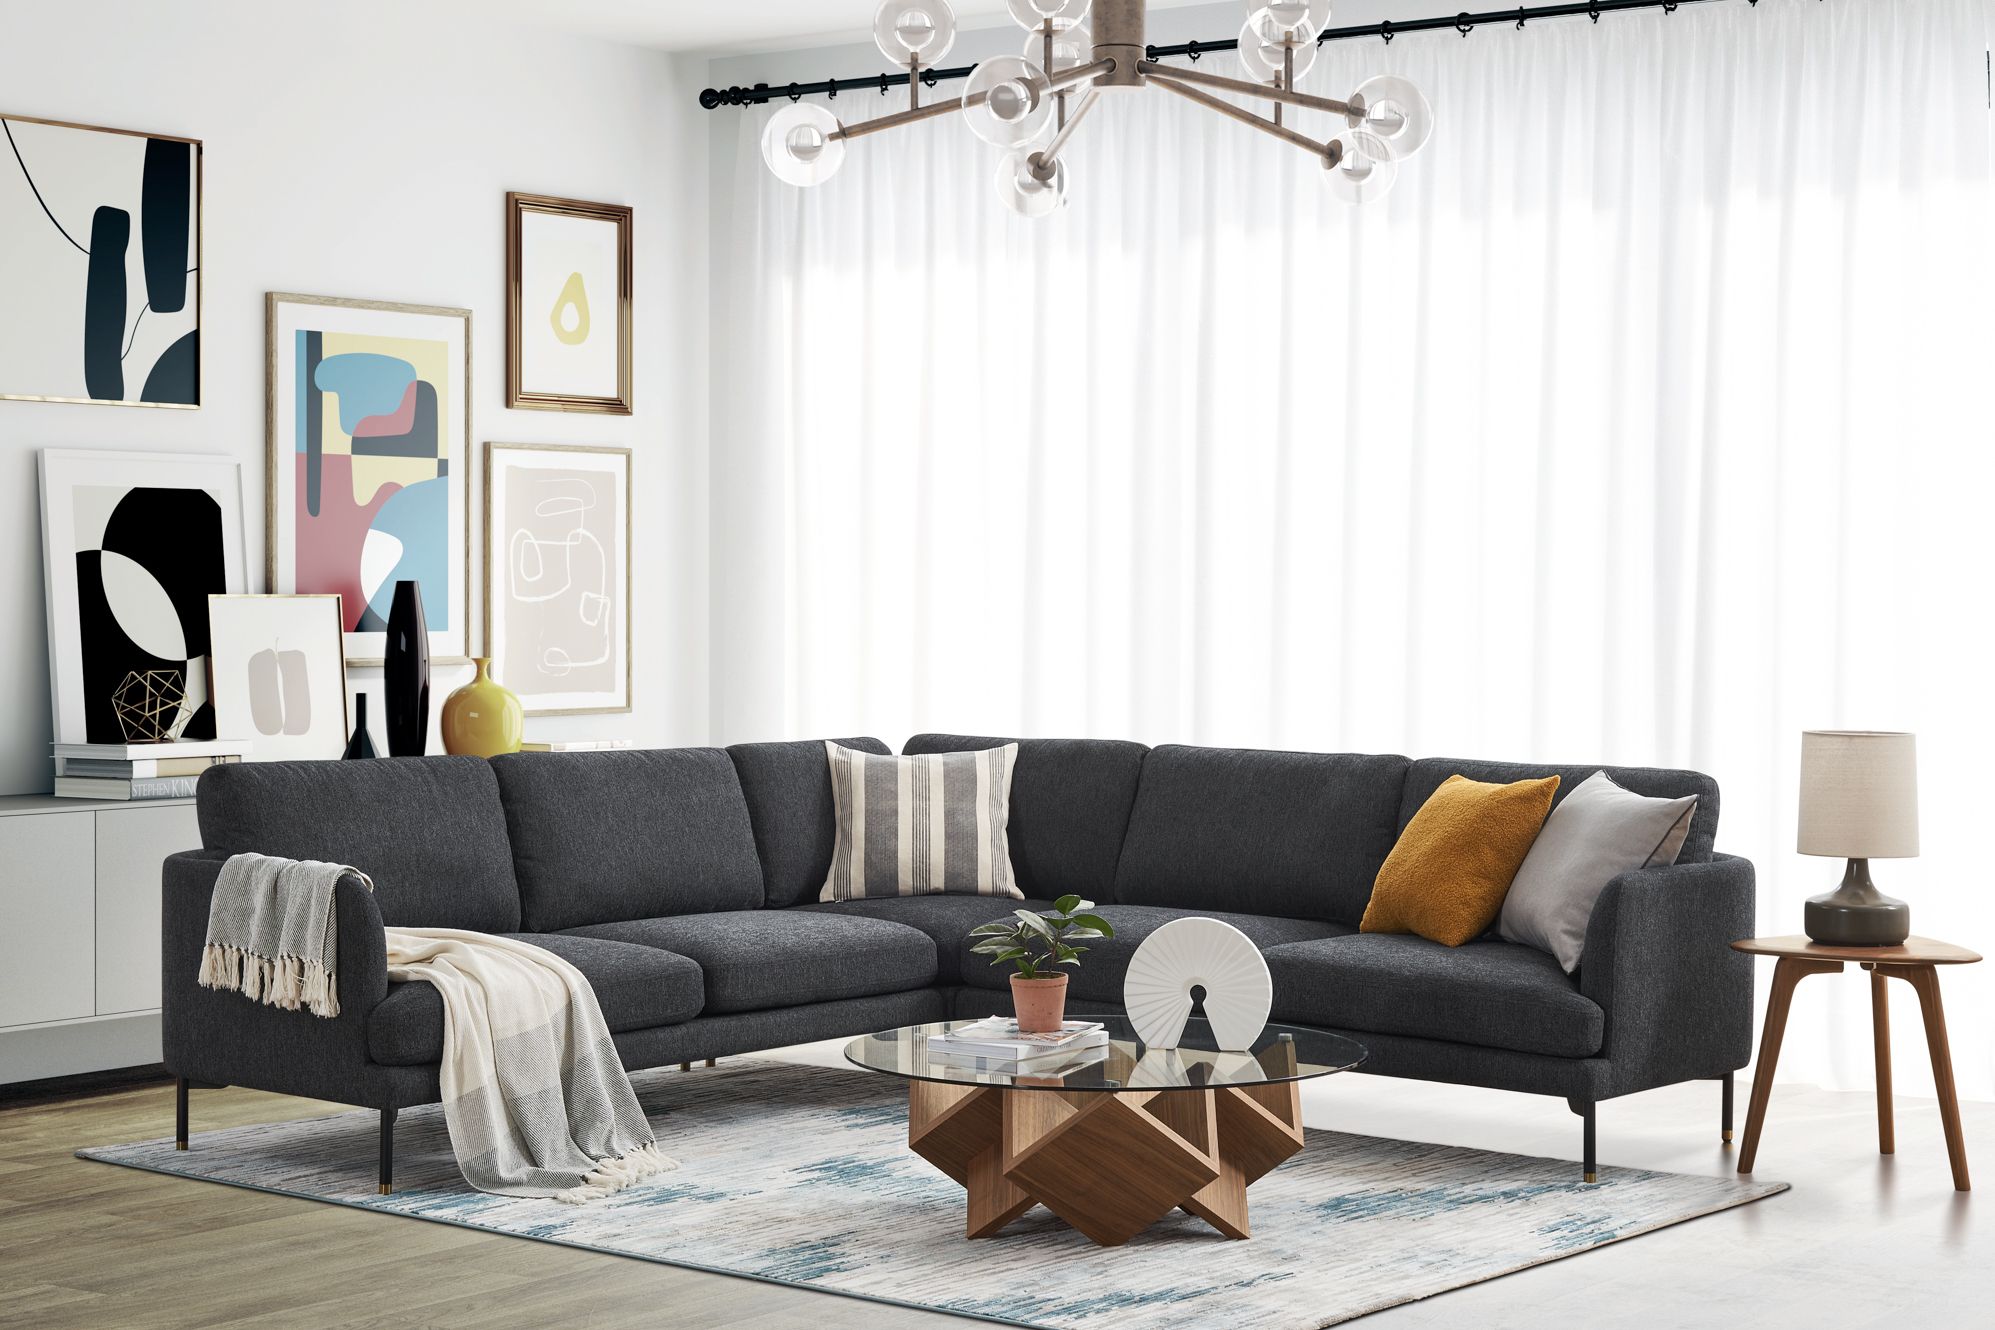 L Shape Sofas For Small Living Rooms? | Castlery Singapore With Small L Shaped Sectional Sofas In Beige (View 7 of 15)